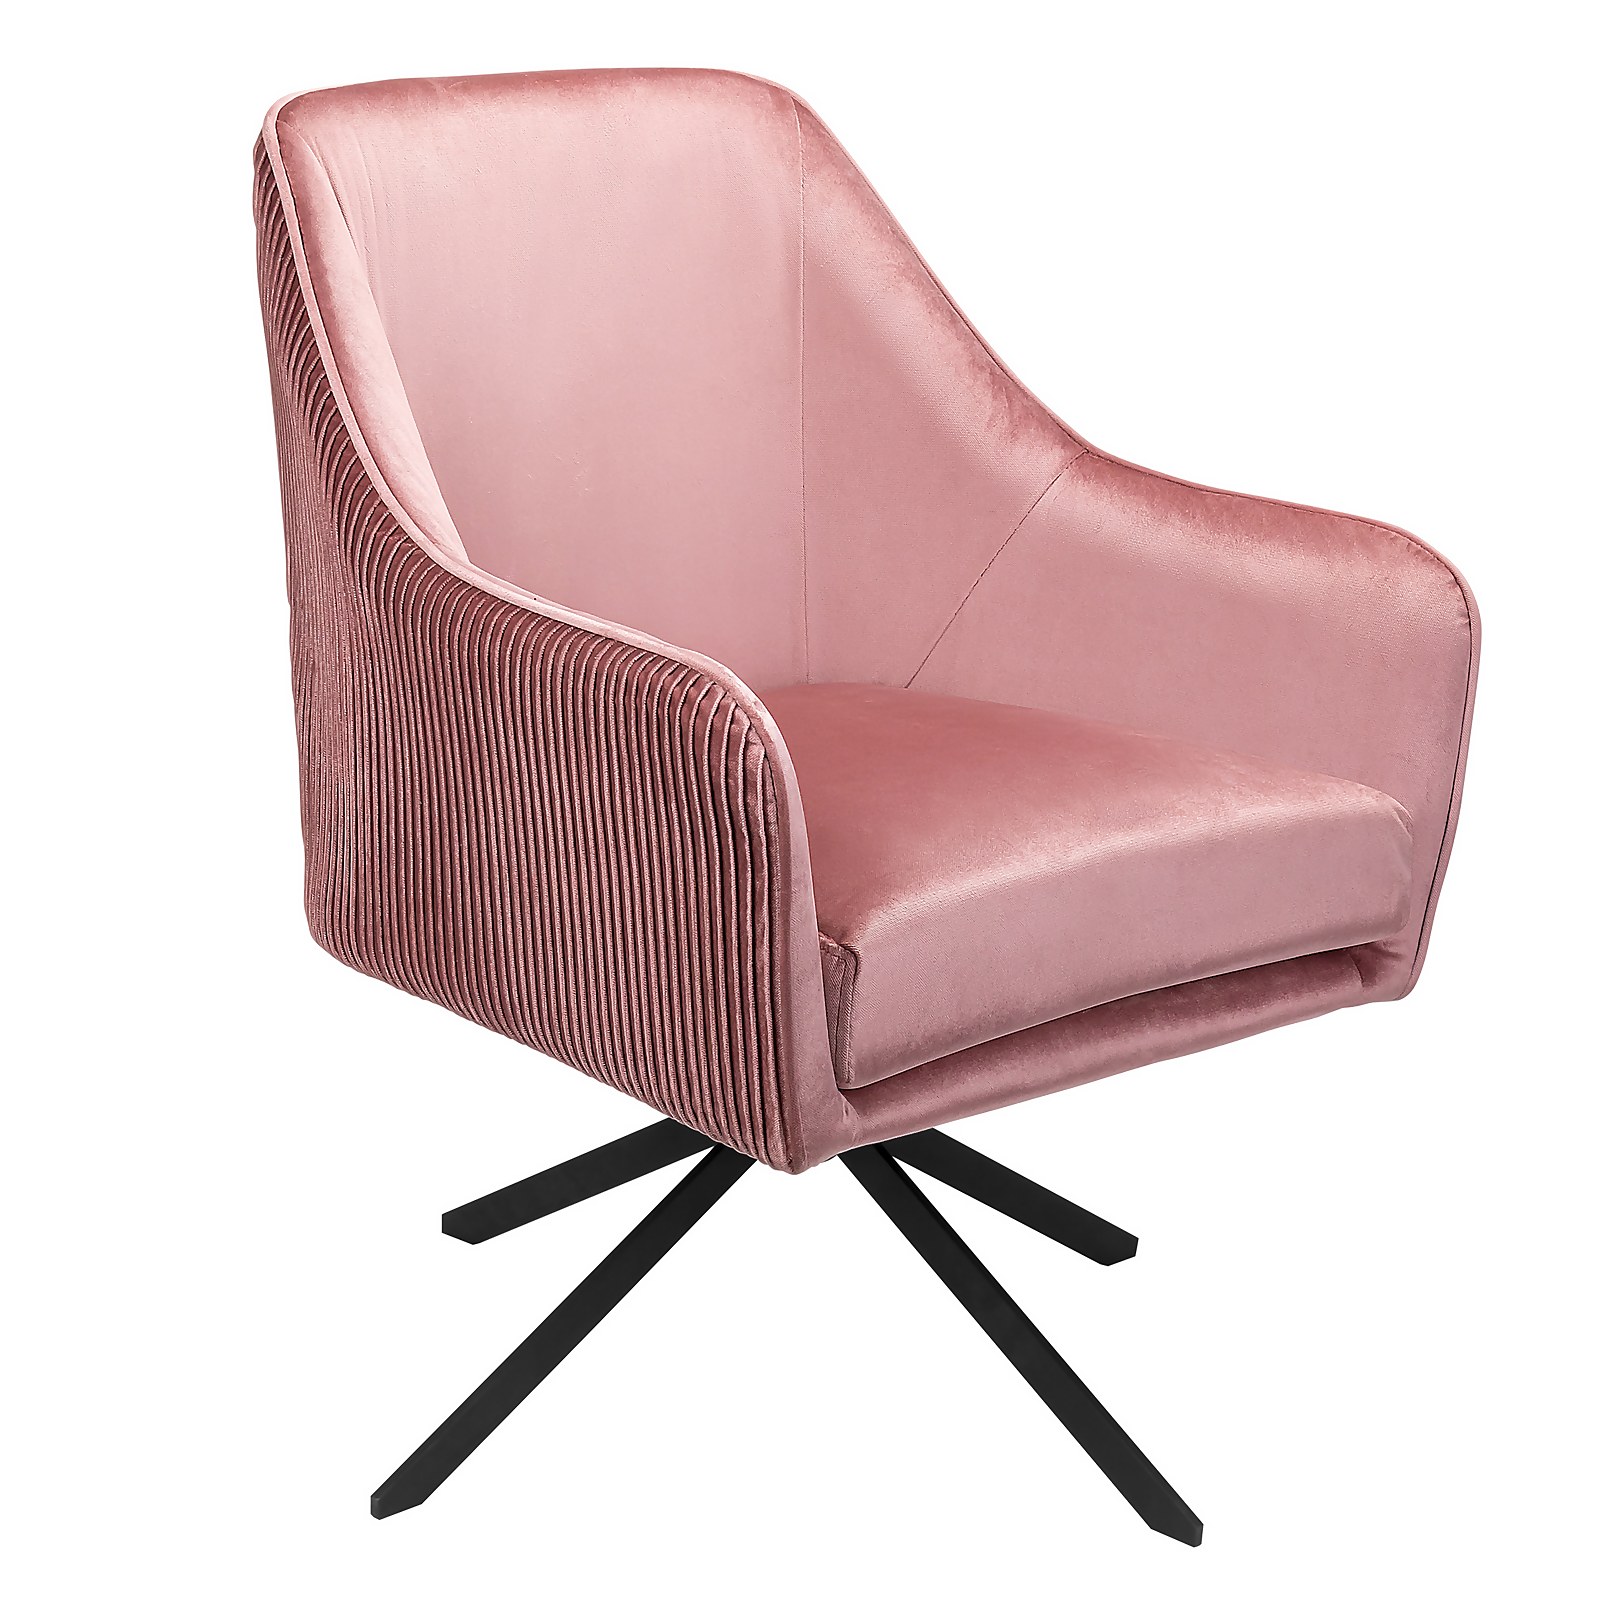 Photo of Pia Pleat Swivel Chair - Rose